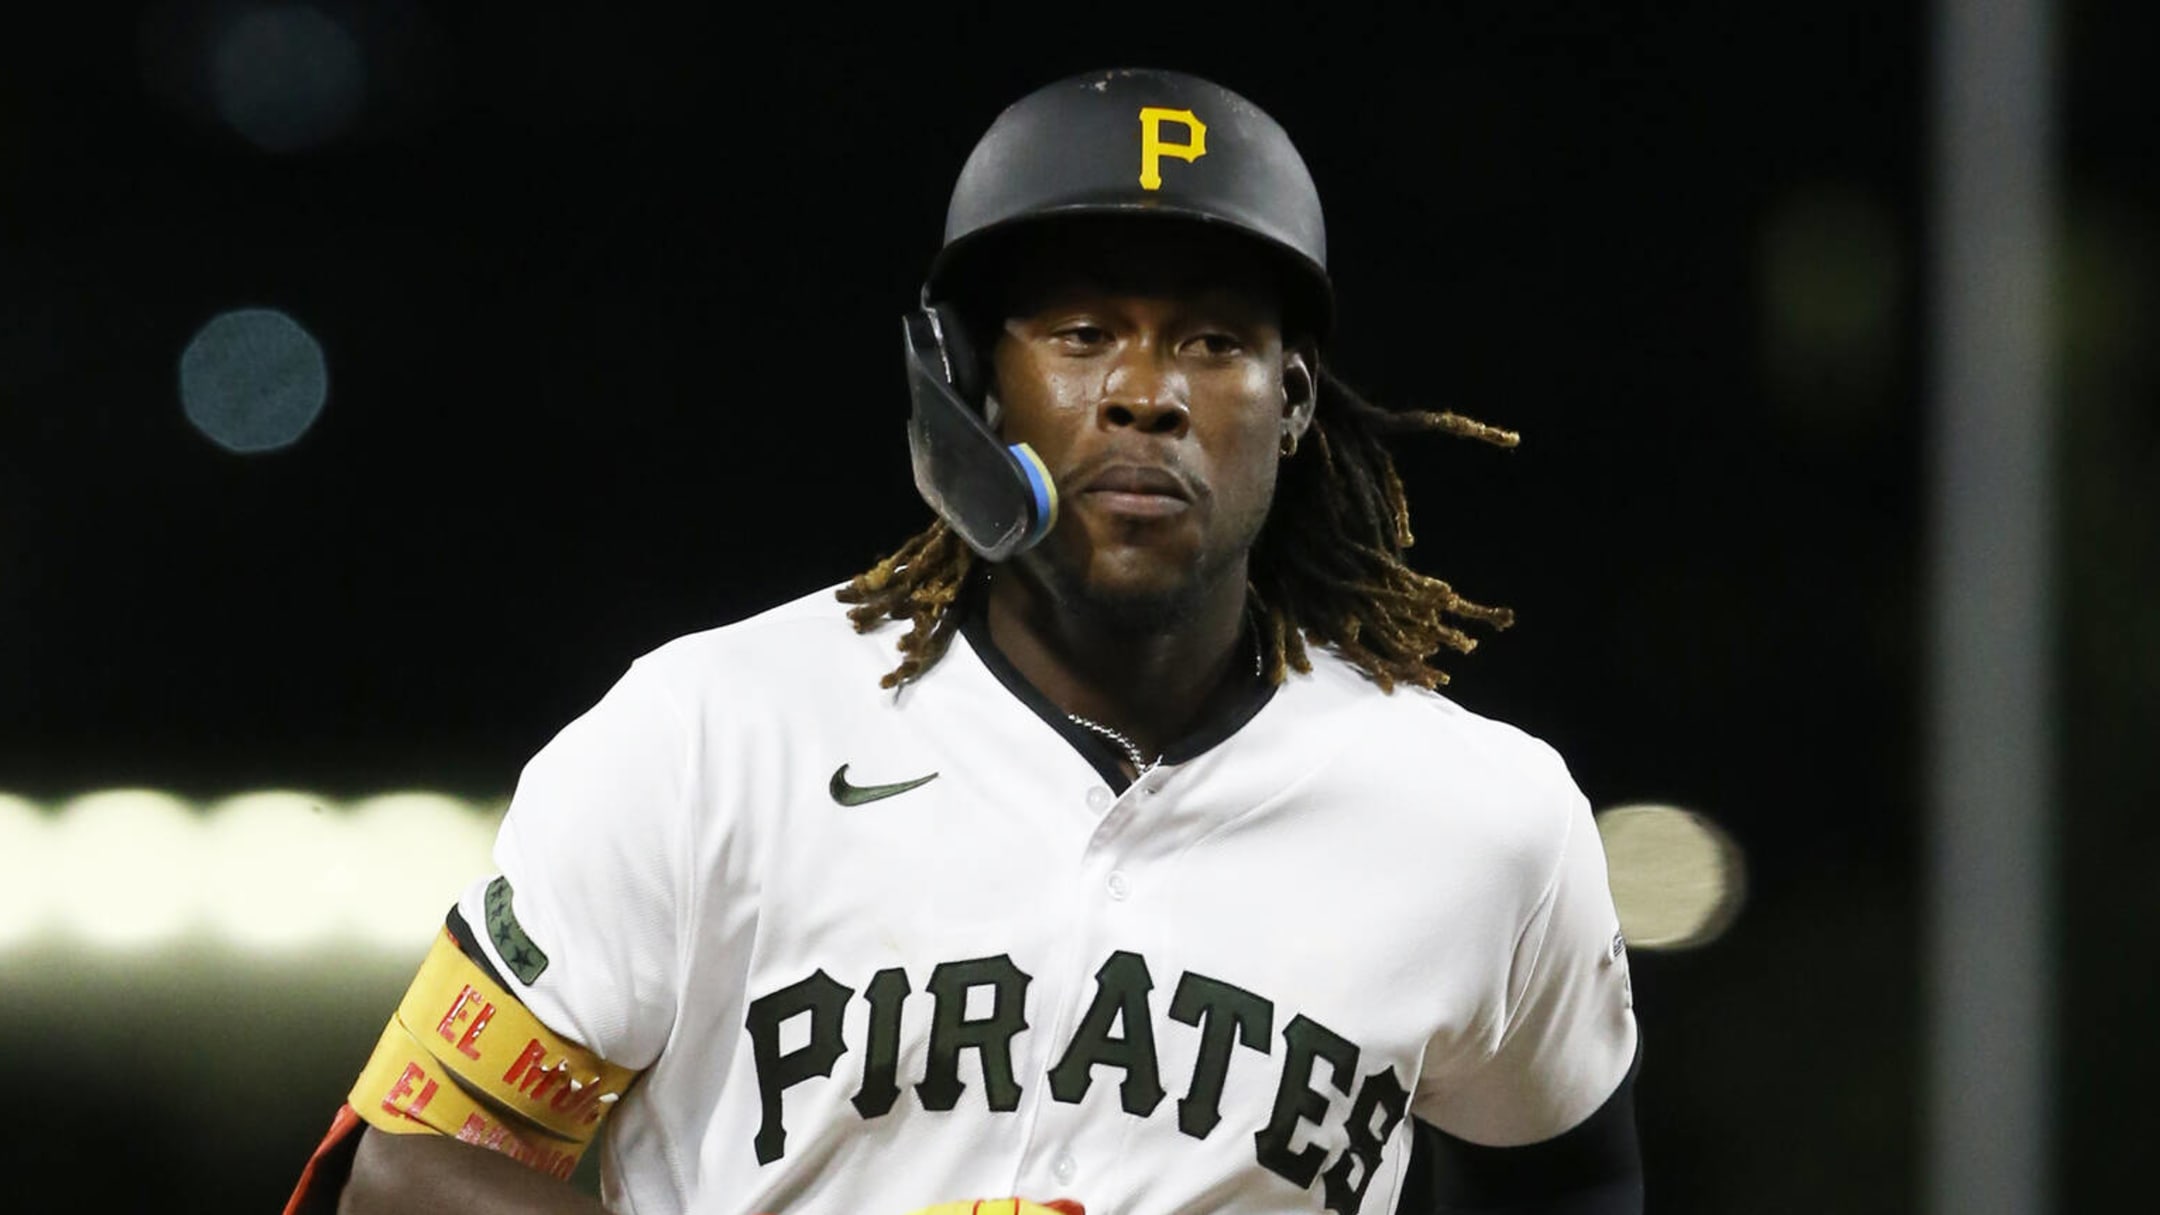 After shattering Statcast records as rookie, Pirates SS Oneil Cruz eyes  exclusive clubs